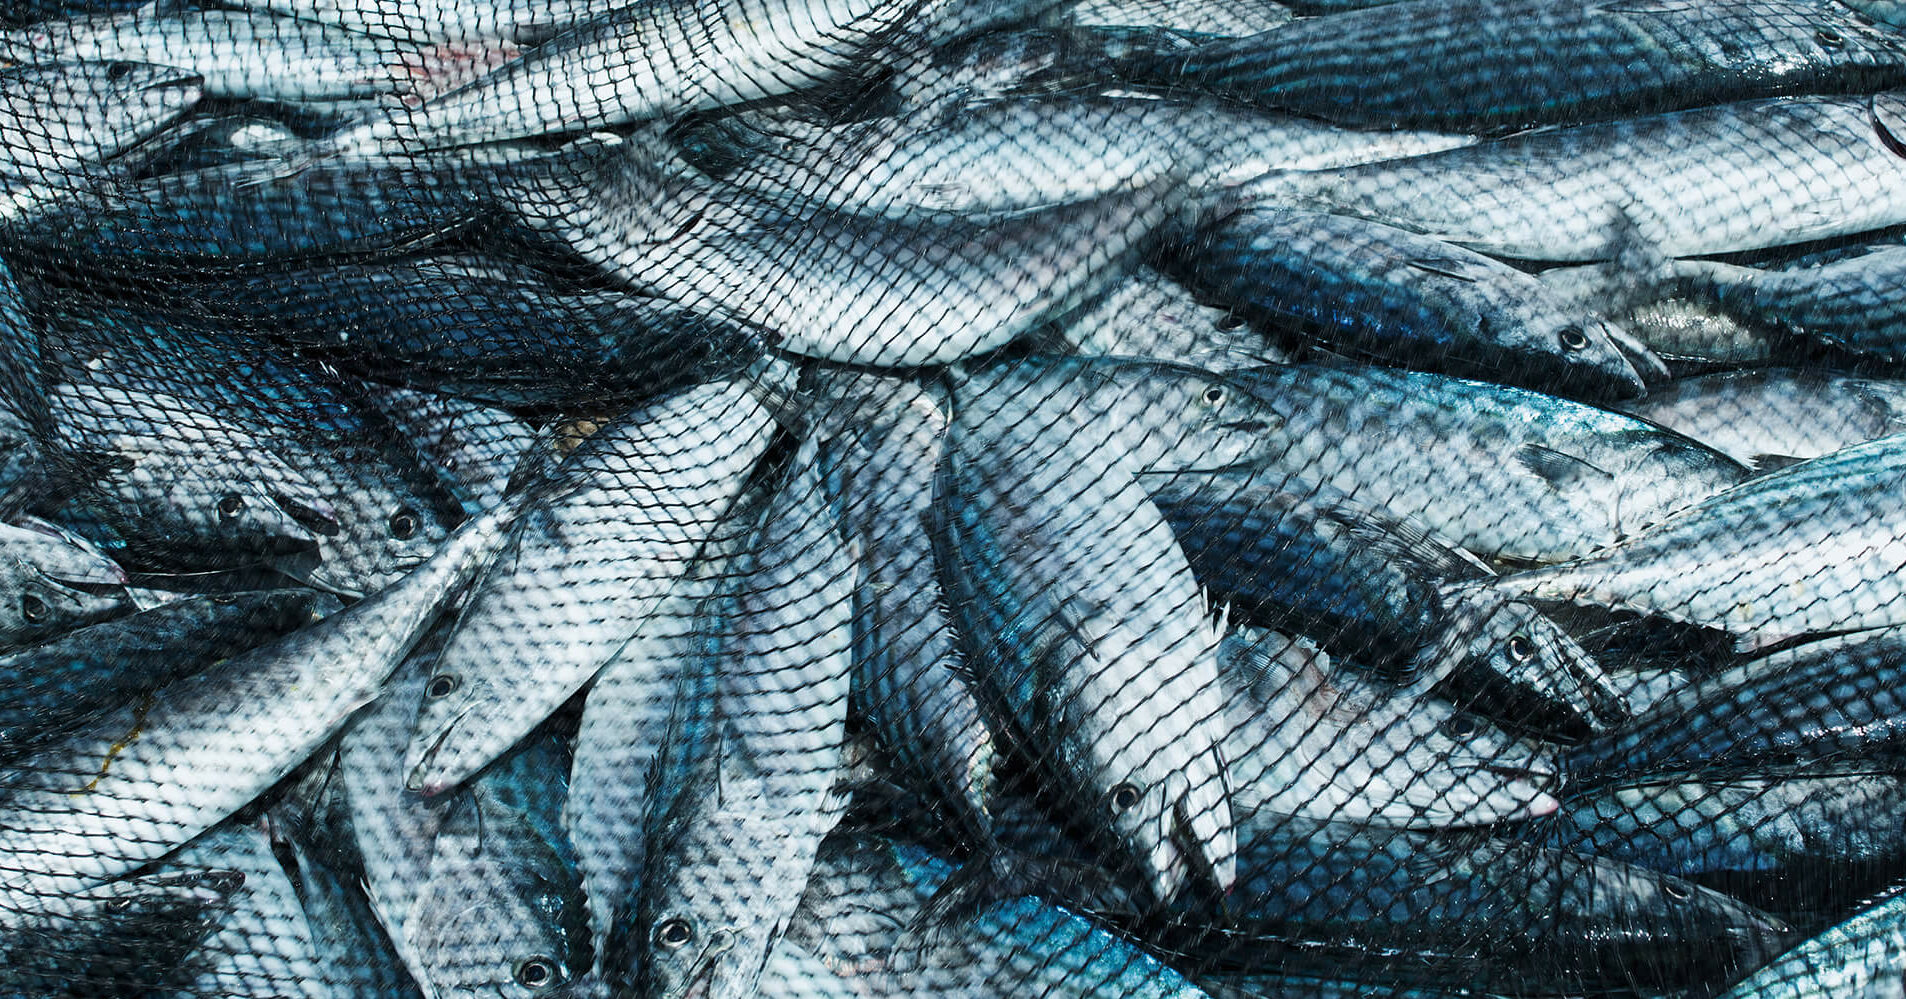 Farmed Fish Are Suffering, by Animal Equality